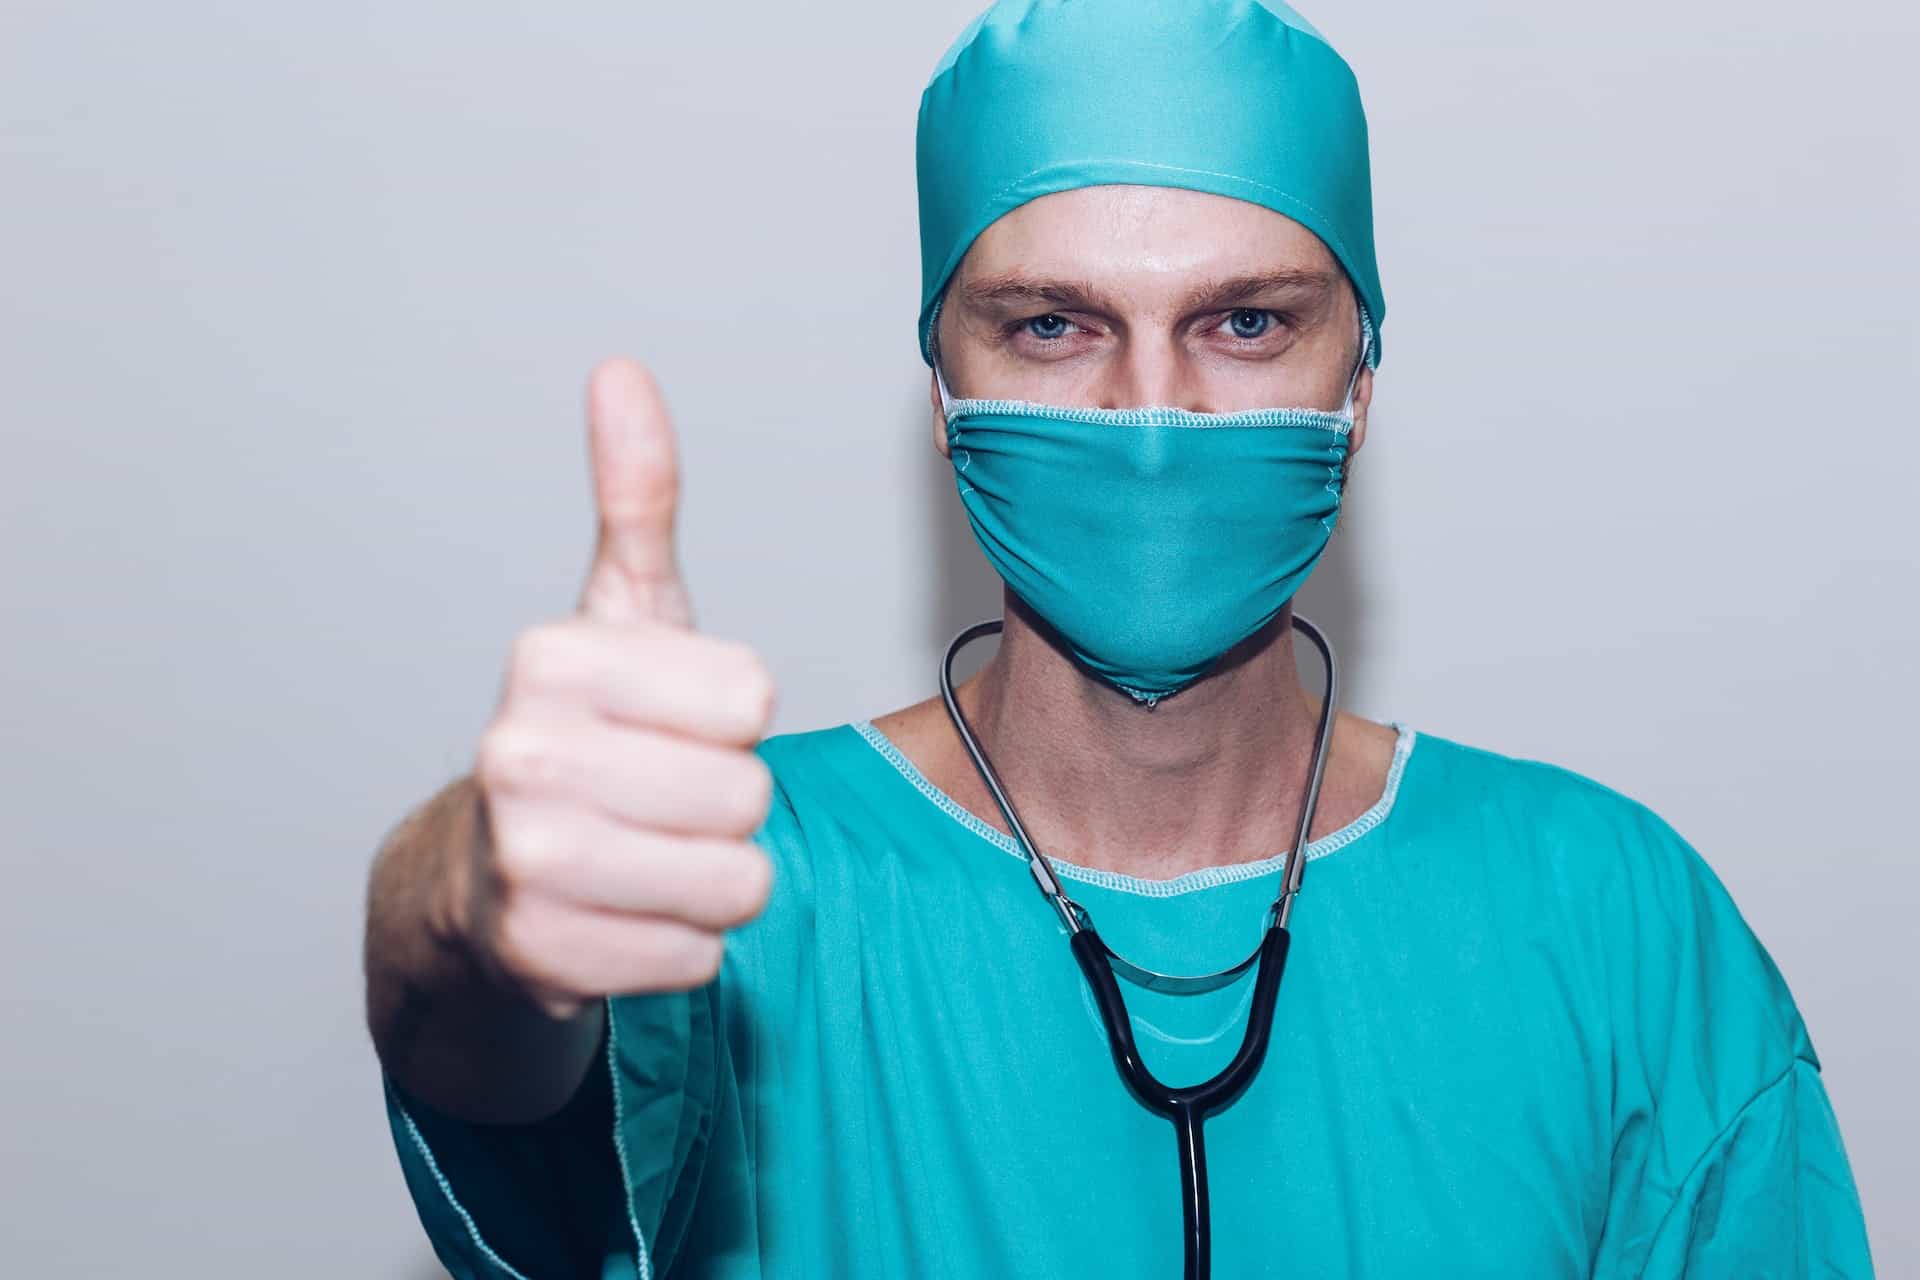 Surgeon giving a thumbs up